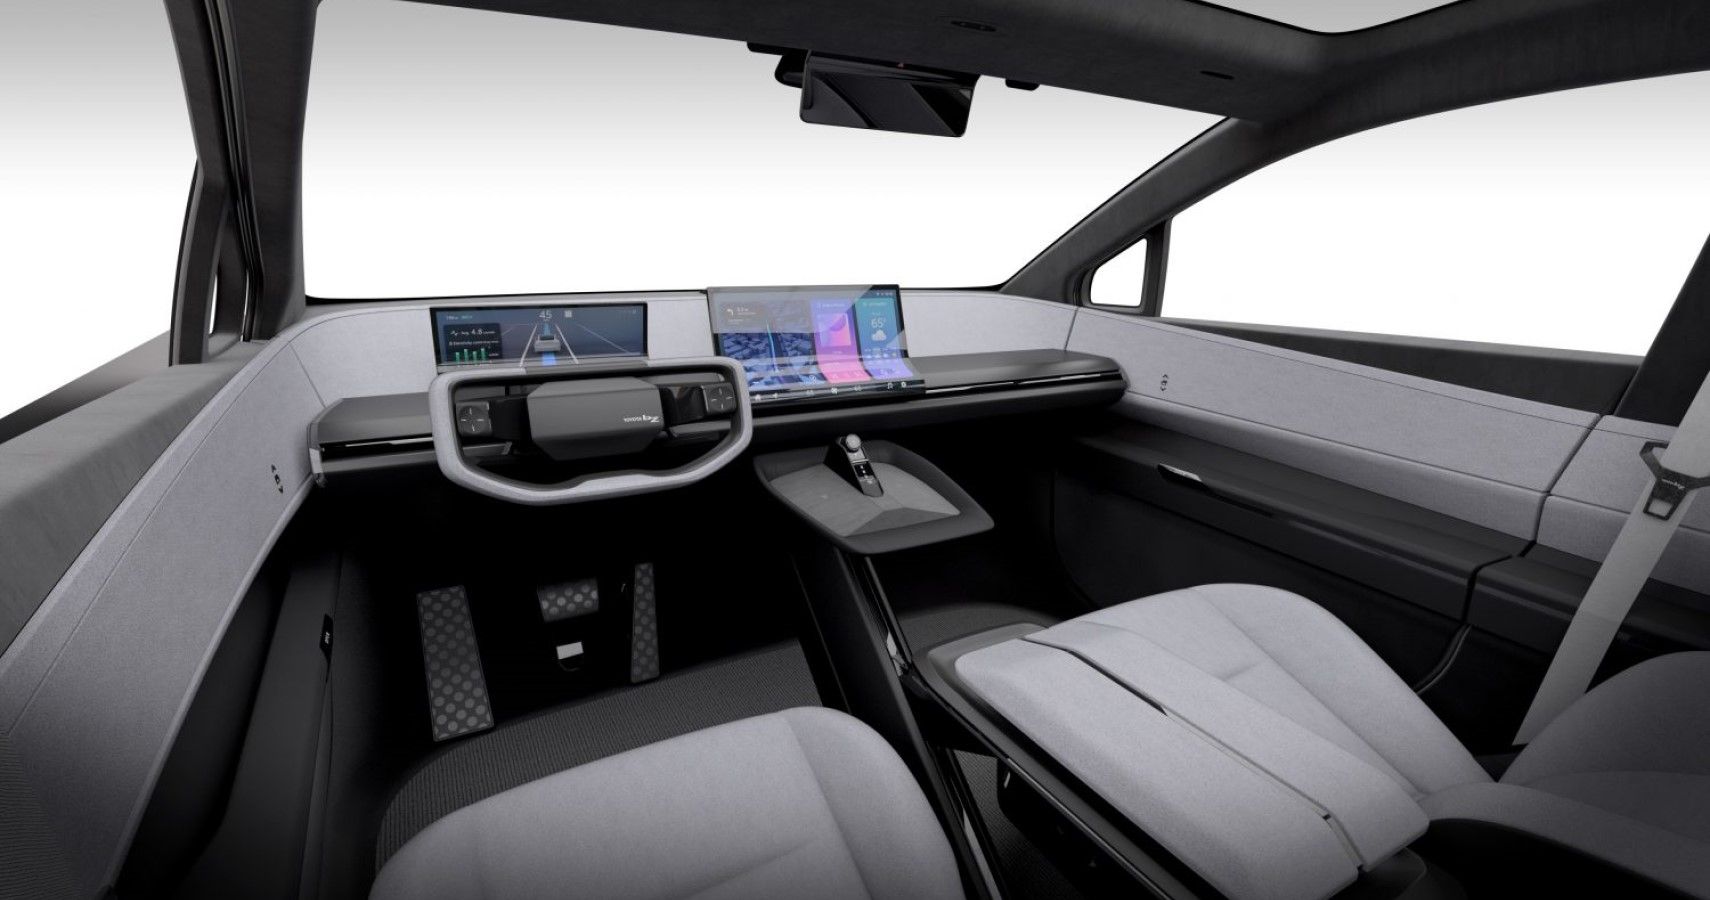 New Toyota bZ Compact SUV Concept Interior Is Like Nothing Else